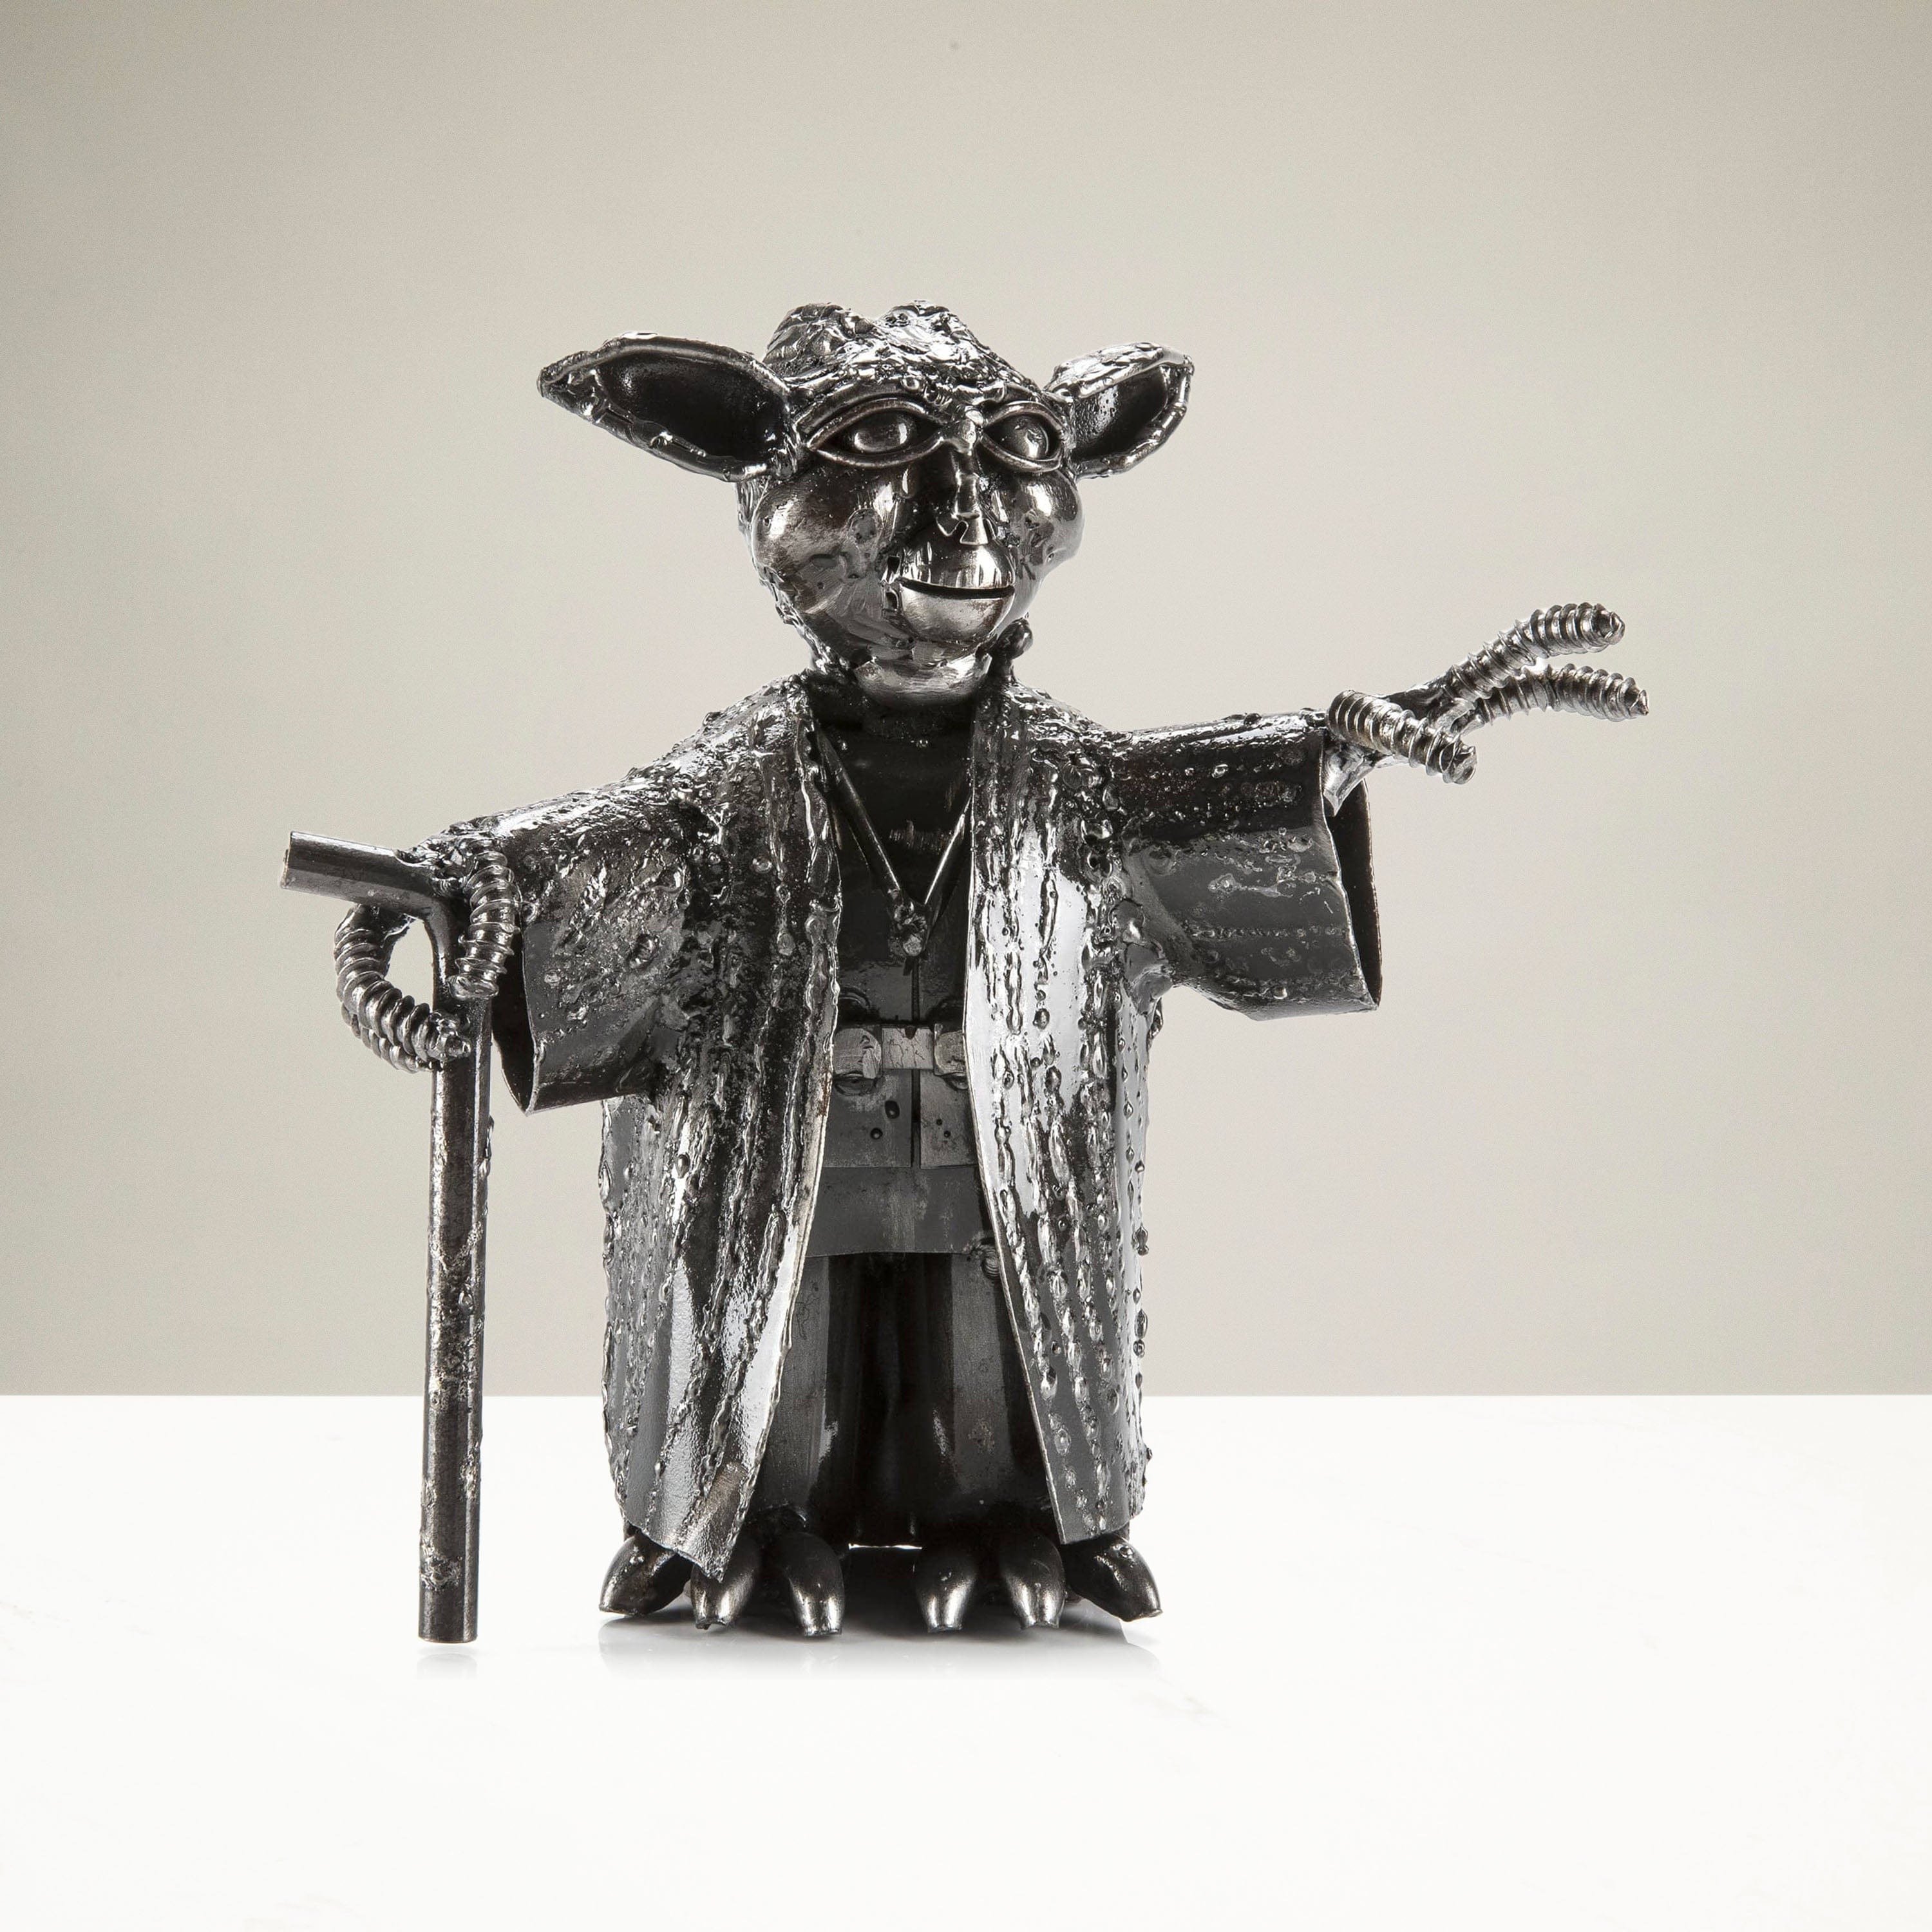 Kalifano Recycled Metal Art Yoda Inspired Recycled Metal Sculpture RMS-600Y-N